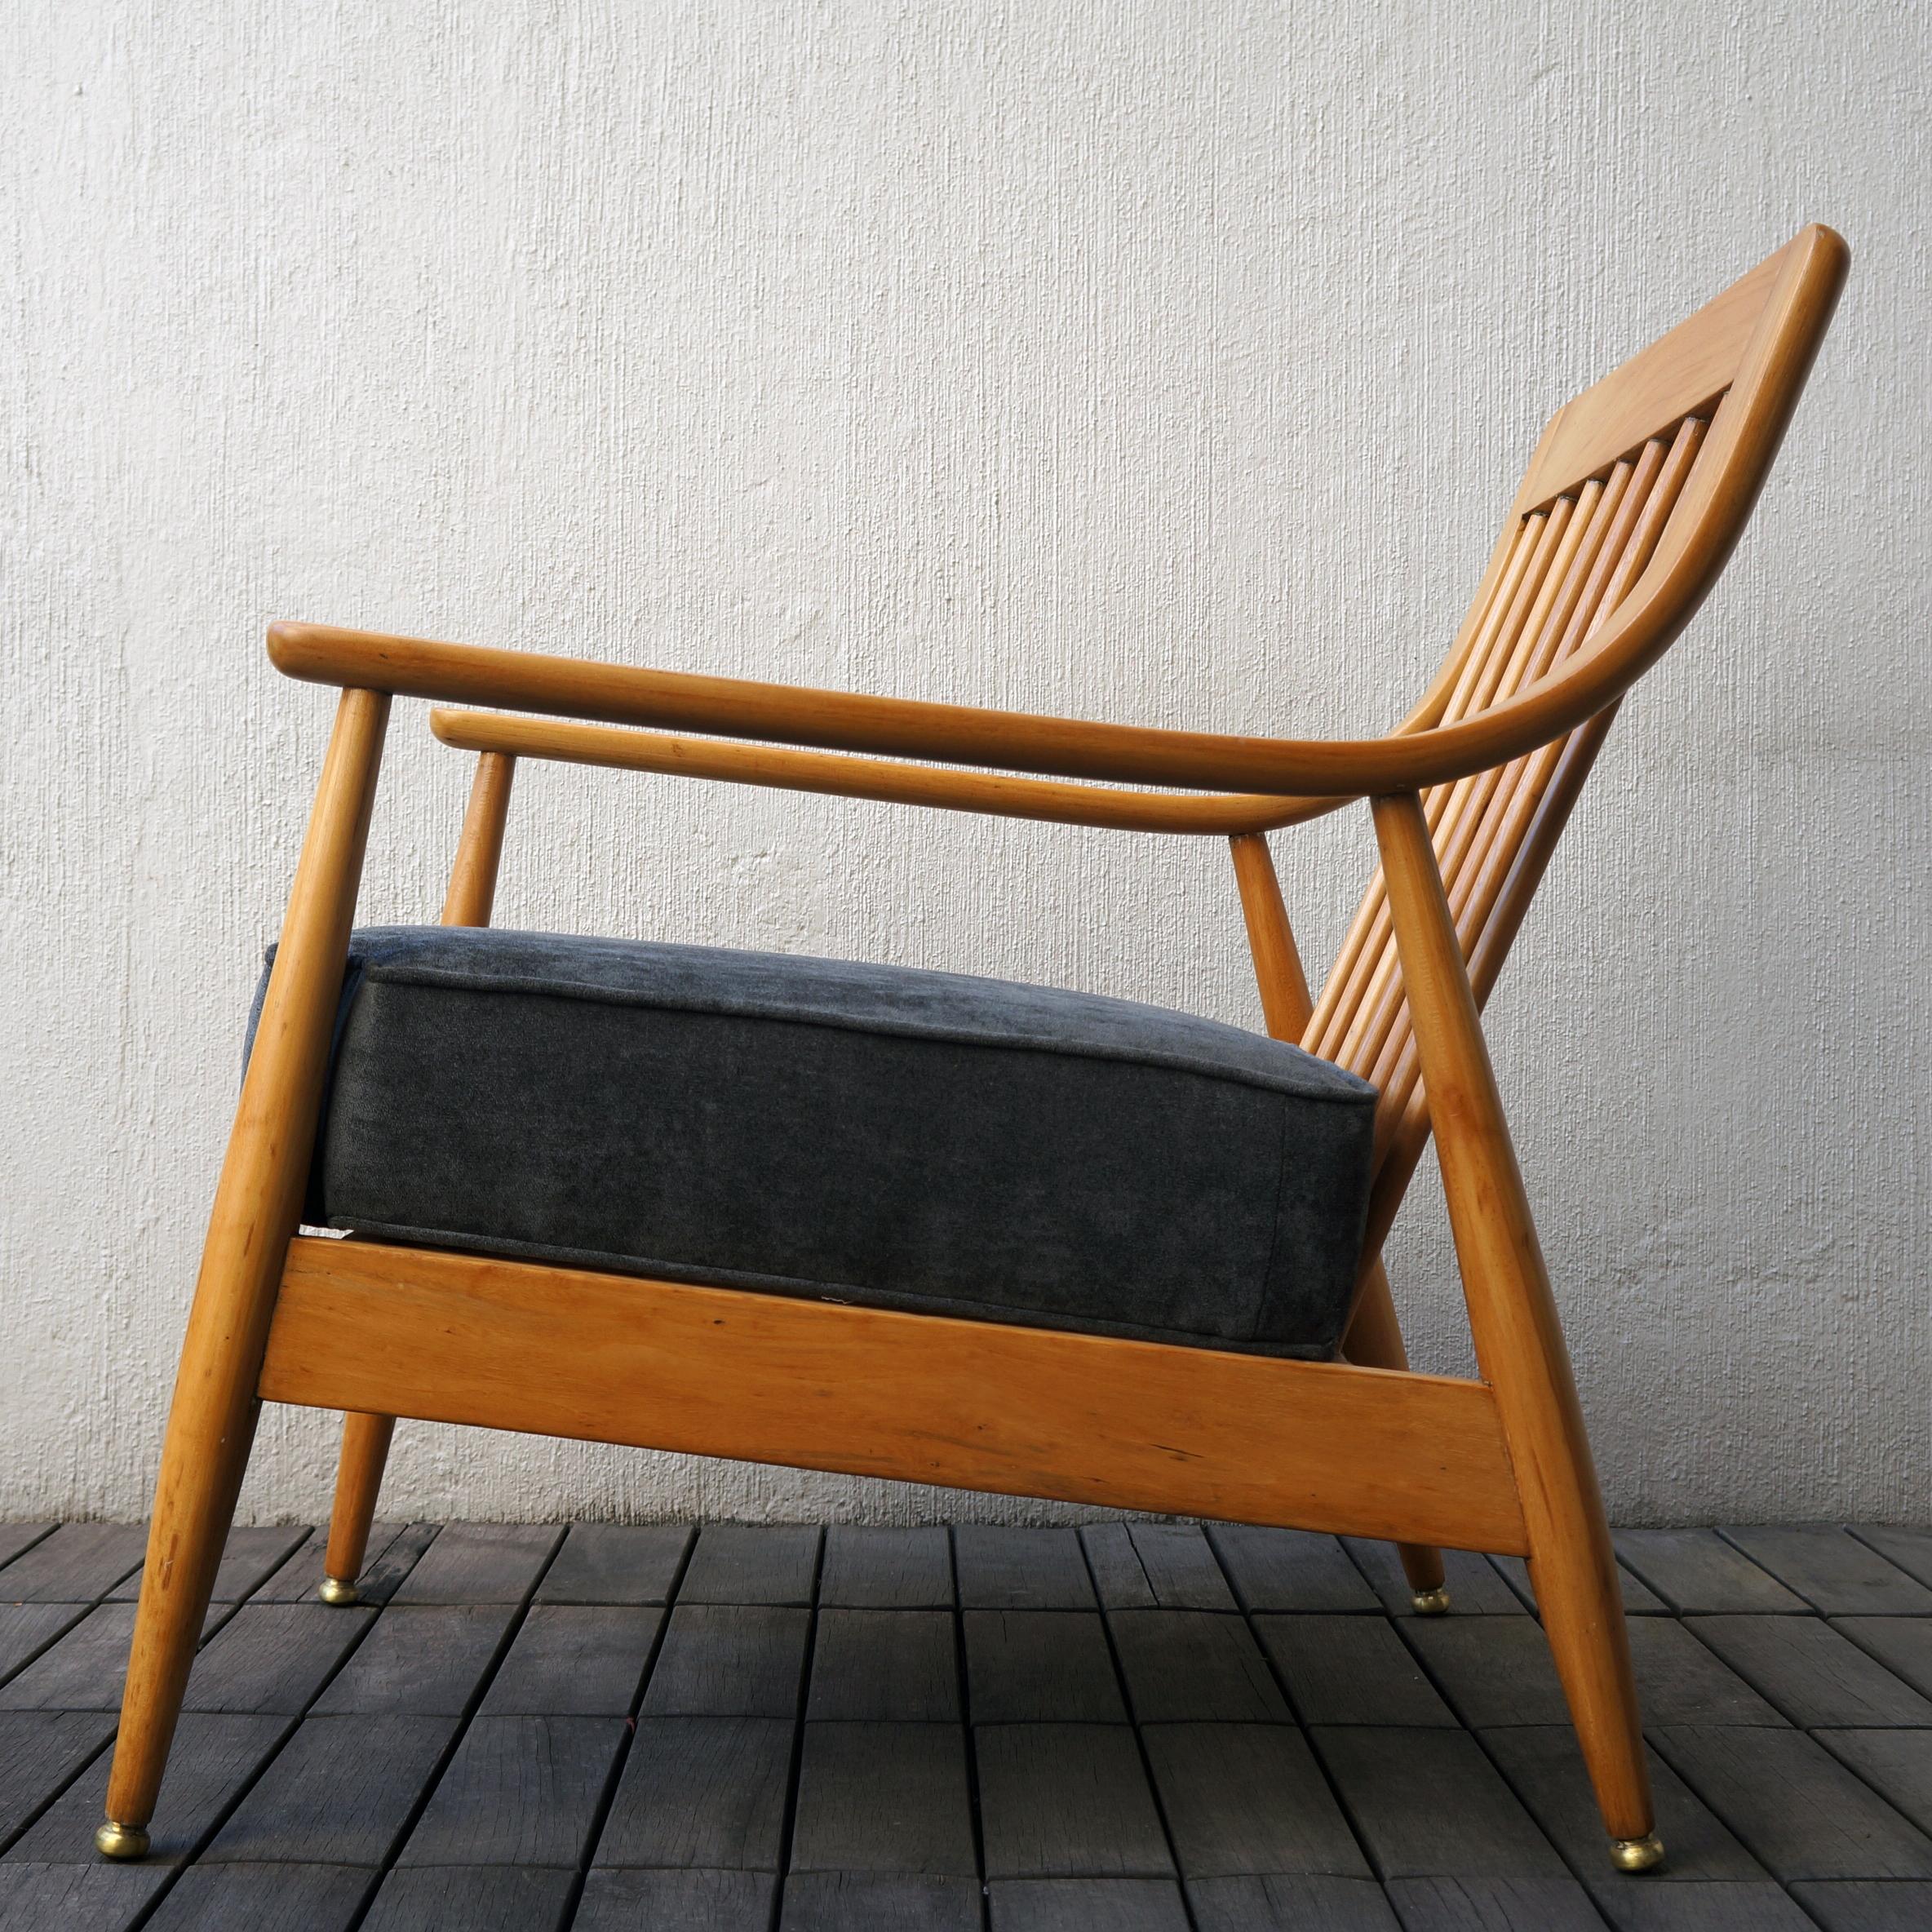 Mid-Century Modern Mexican Midcentury Lounge Chair, “Malinche“, 1950s